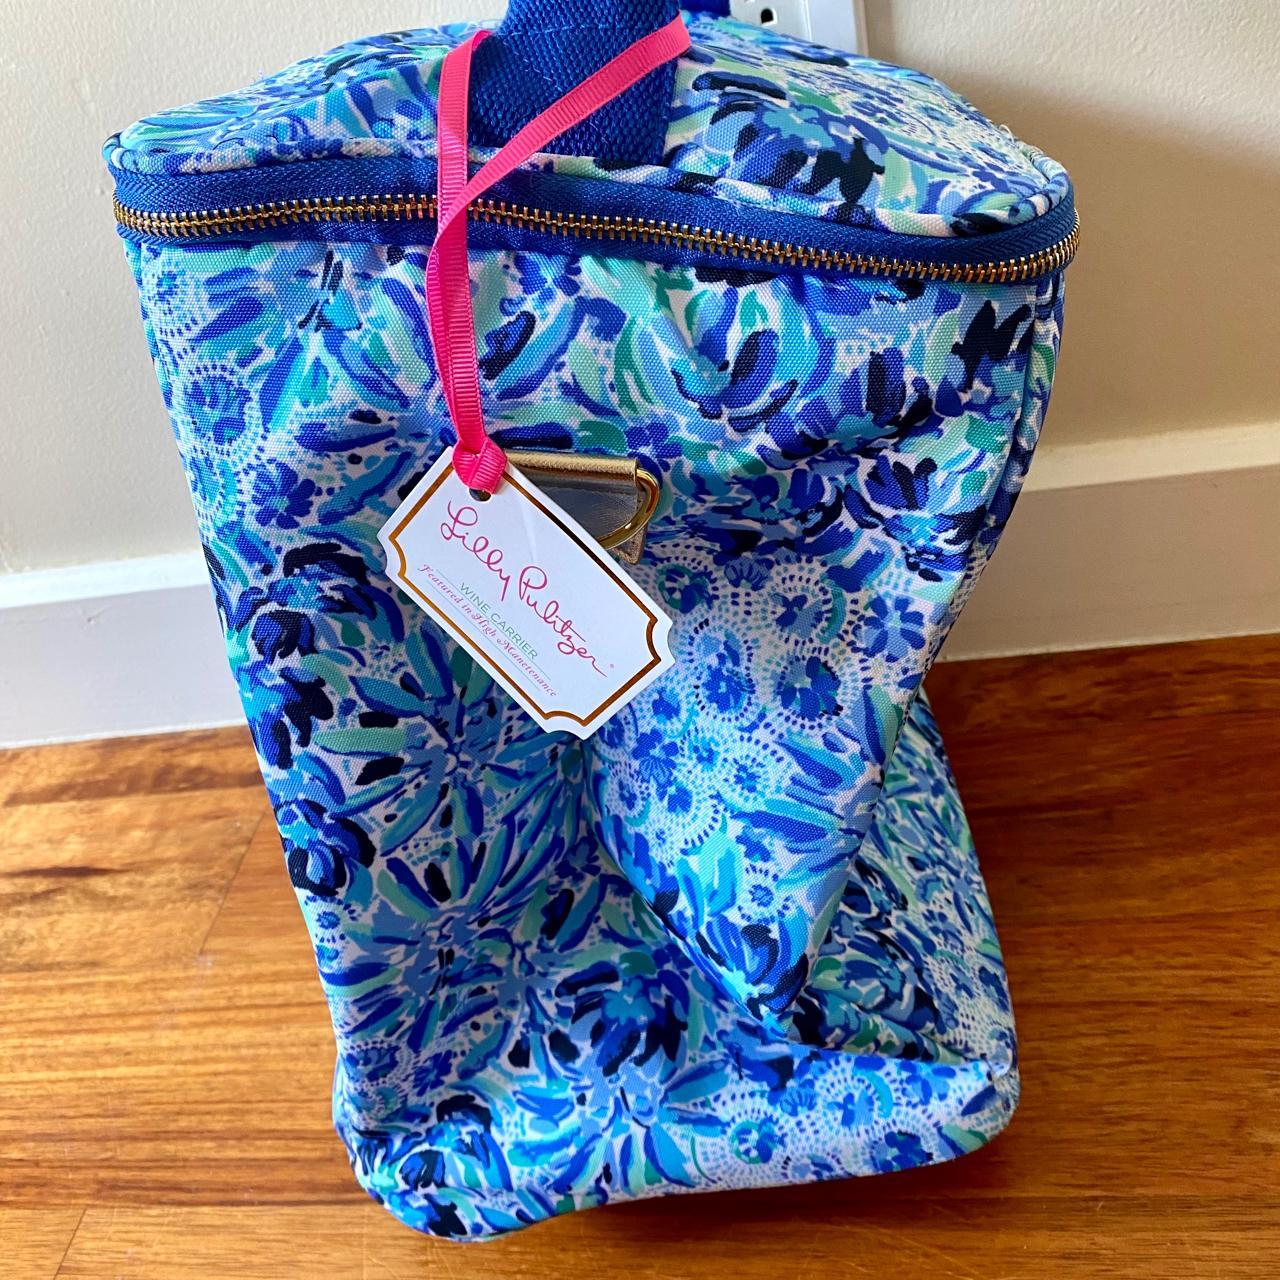 Lilly Pulitzer Women's Blue Bag (2)